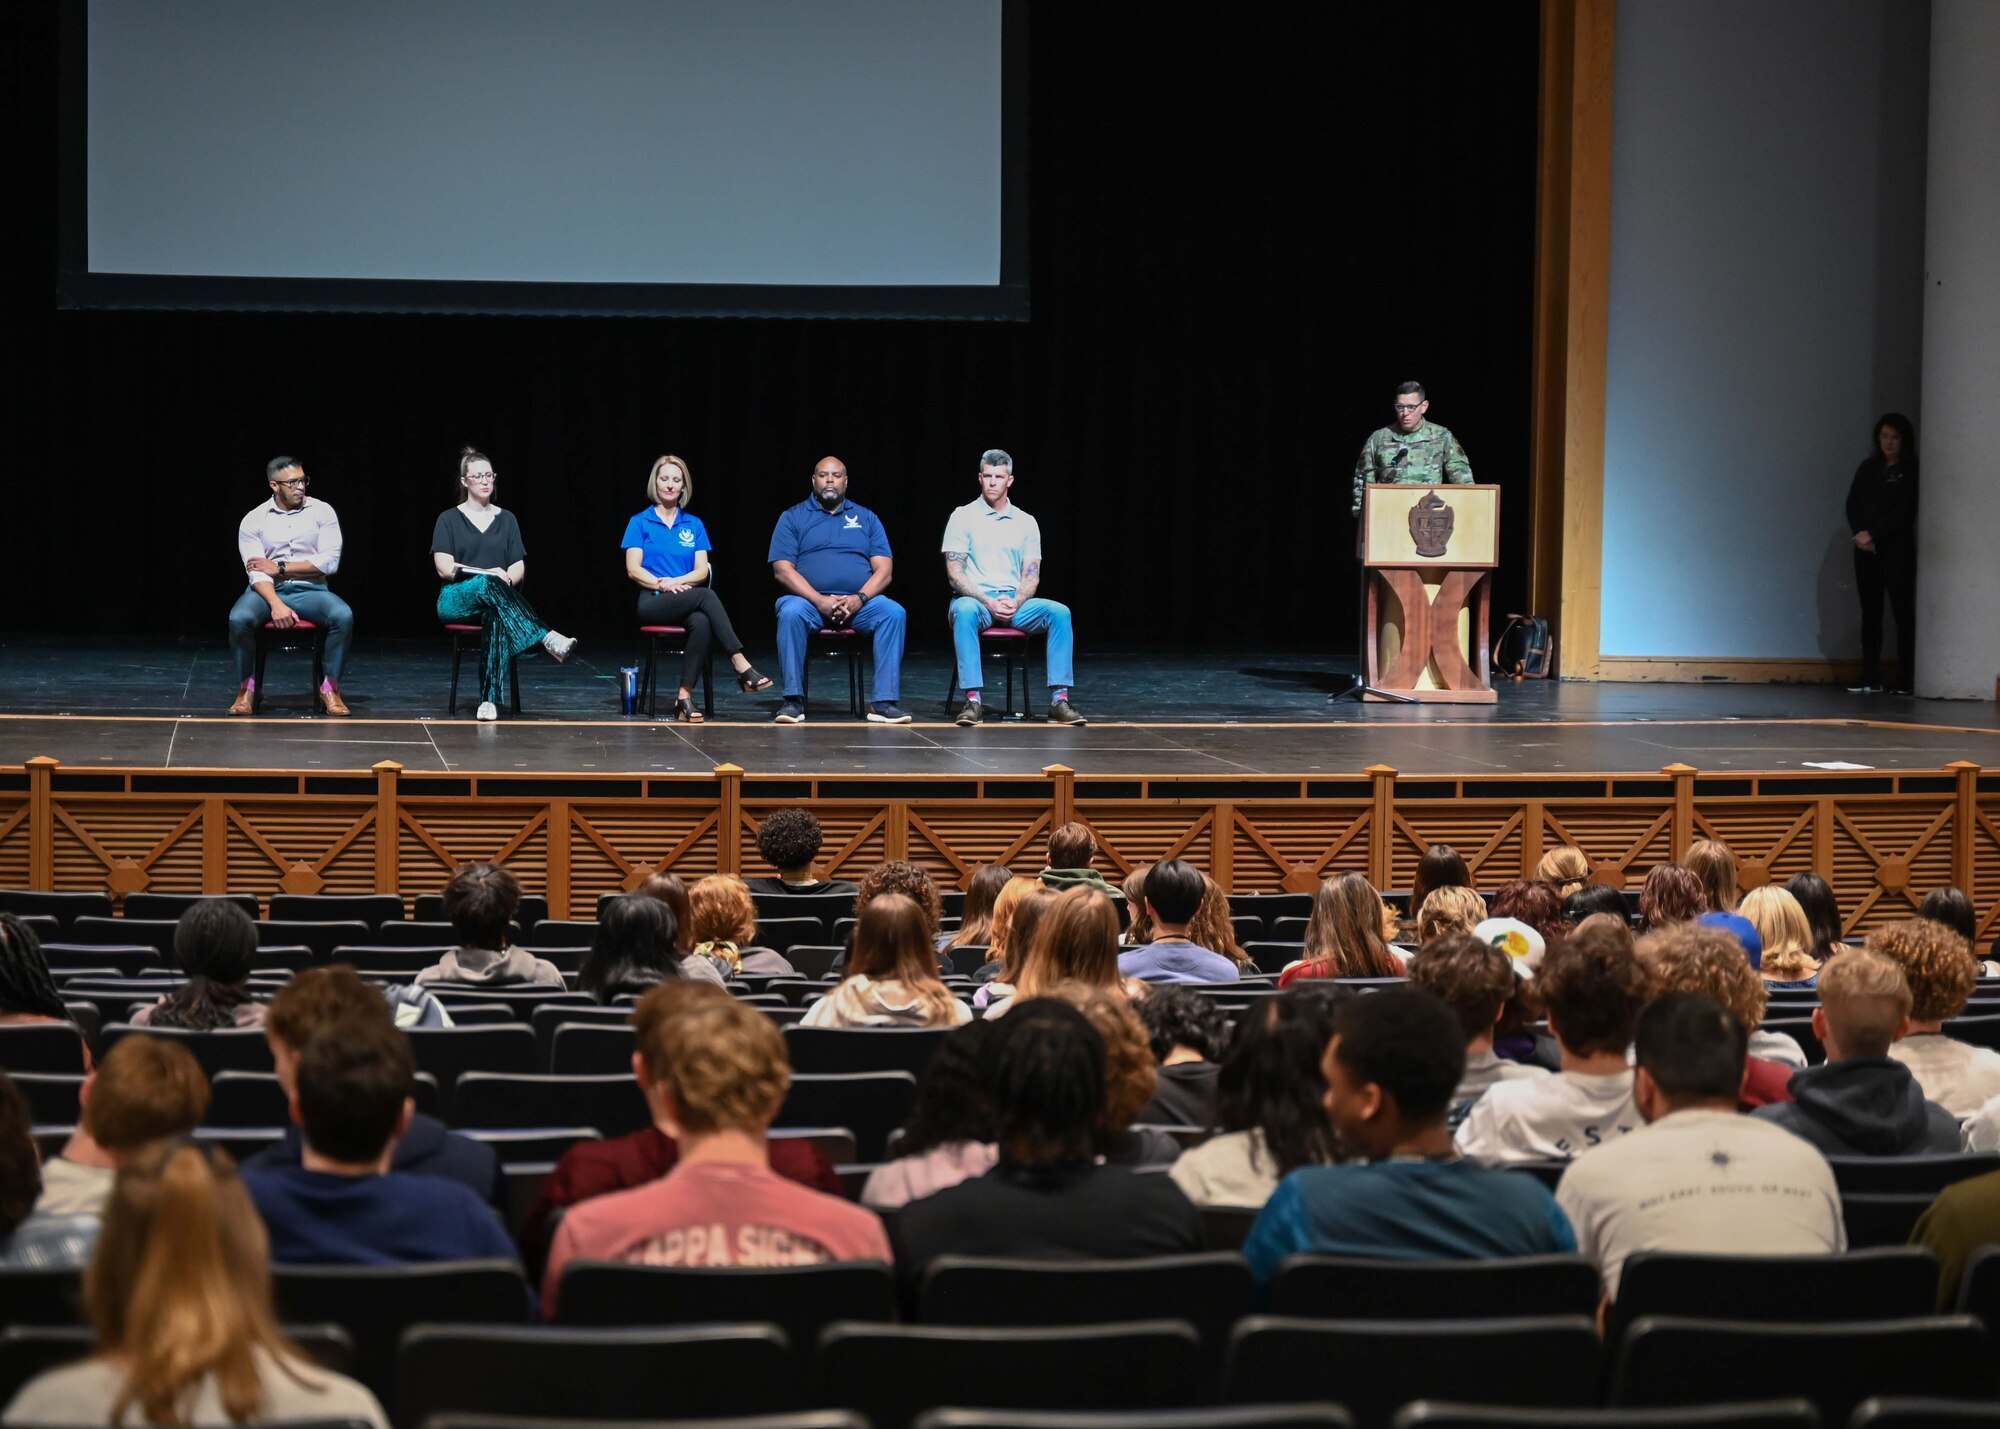 Panel members sit on stage as man addresses high school students.